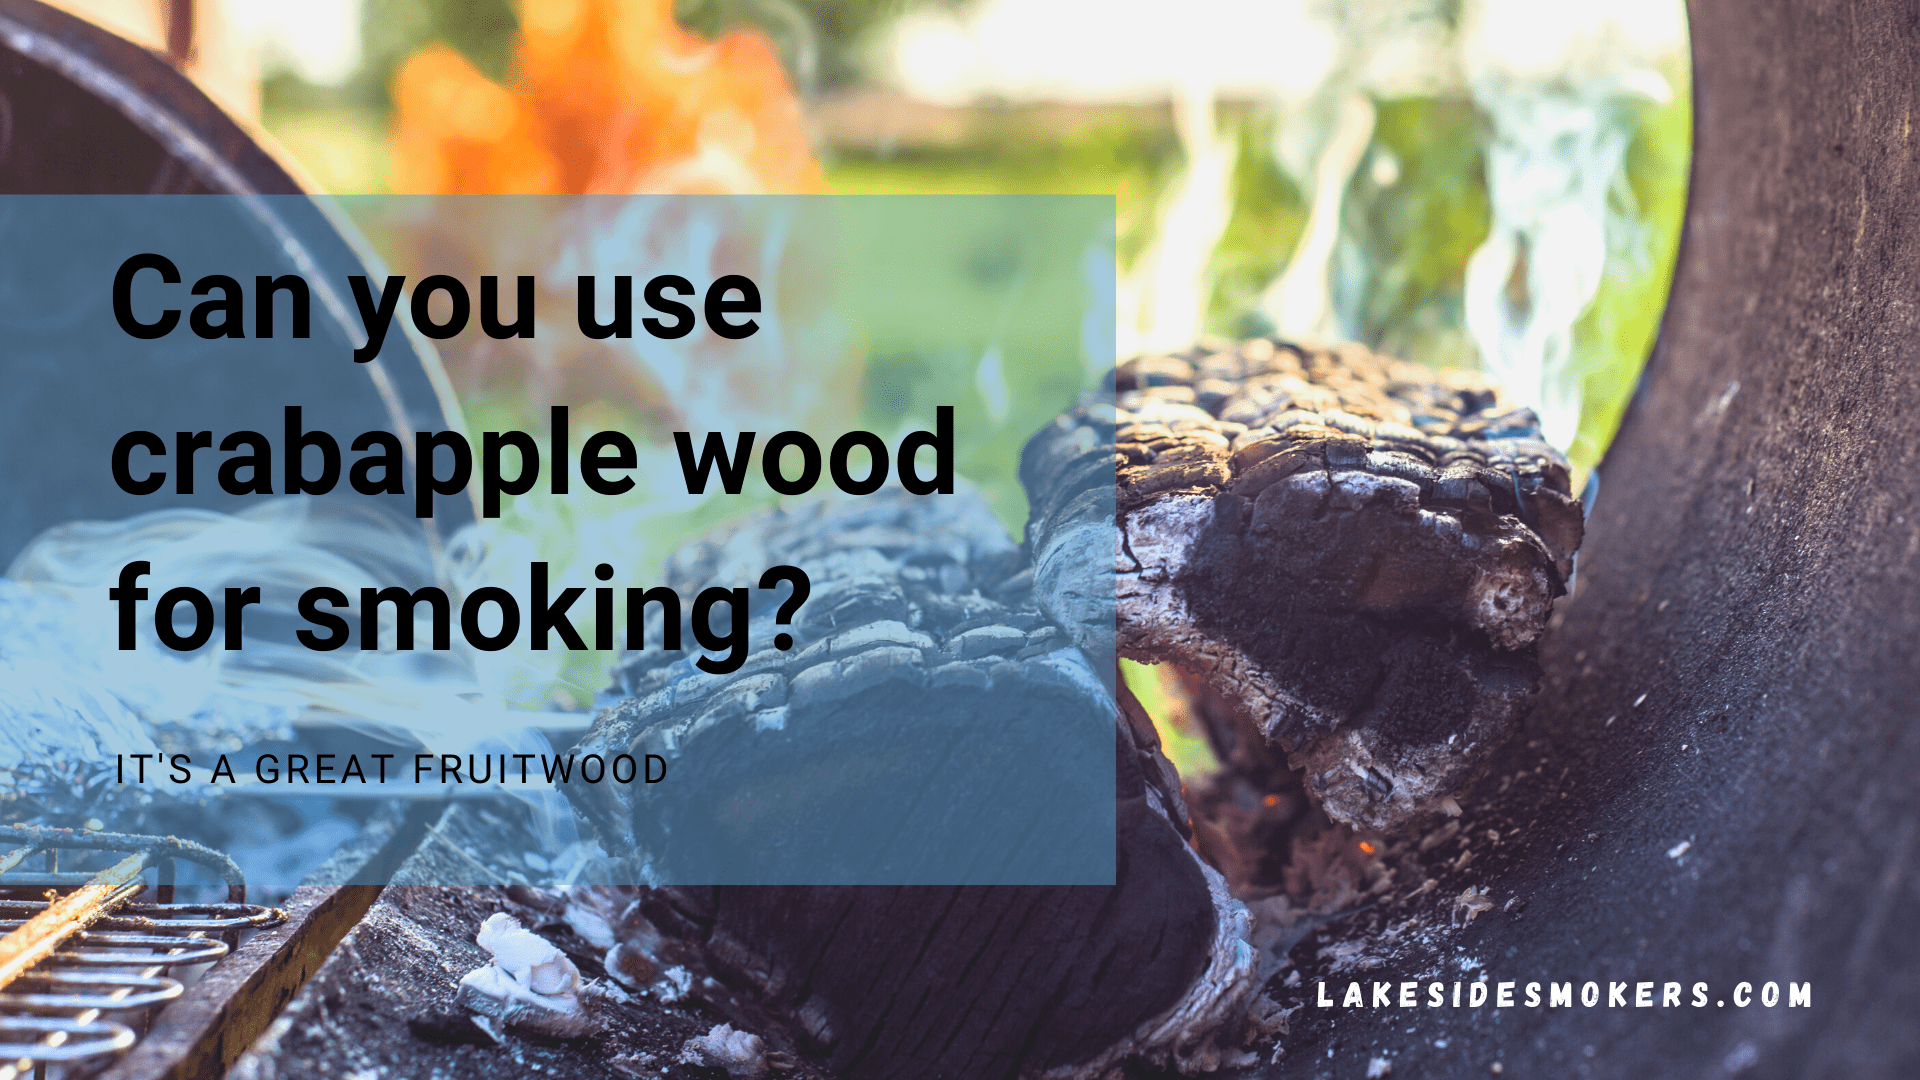 Can you use crabapple wood for smoking? It's a great fruitwood